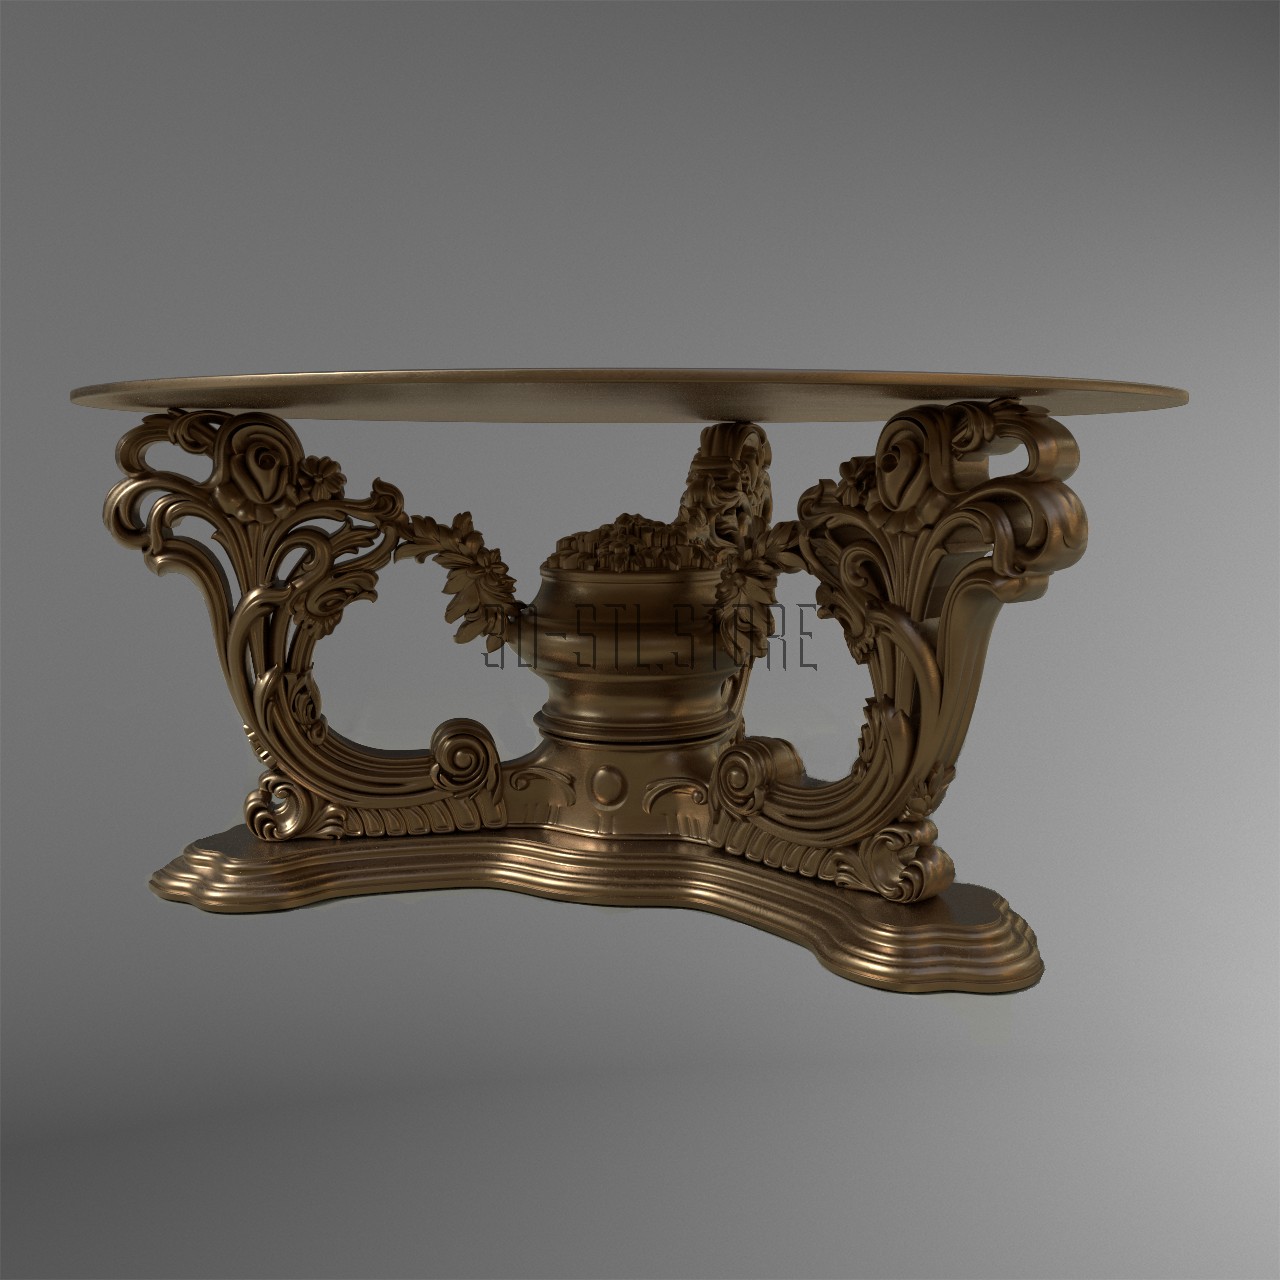 Table with carved legs, 3d models (stl)